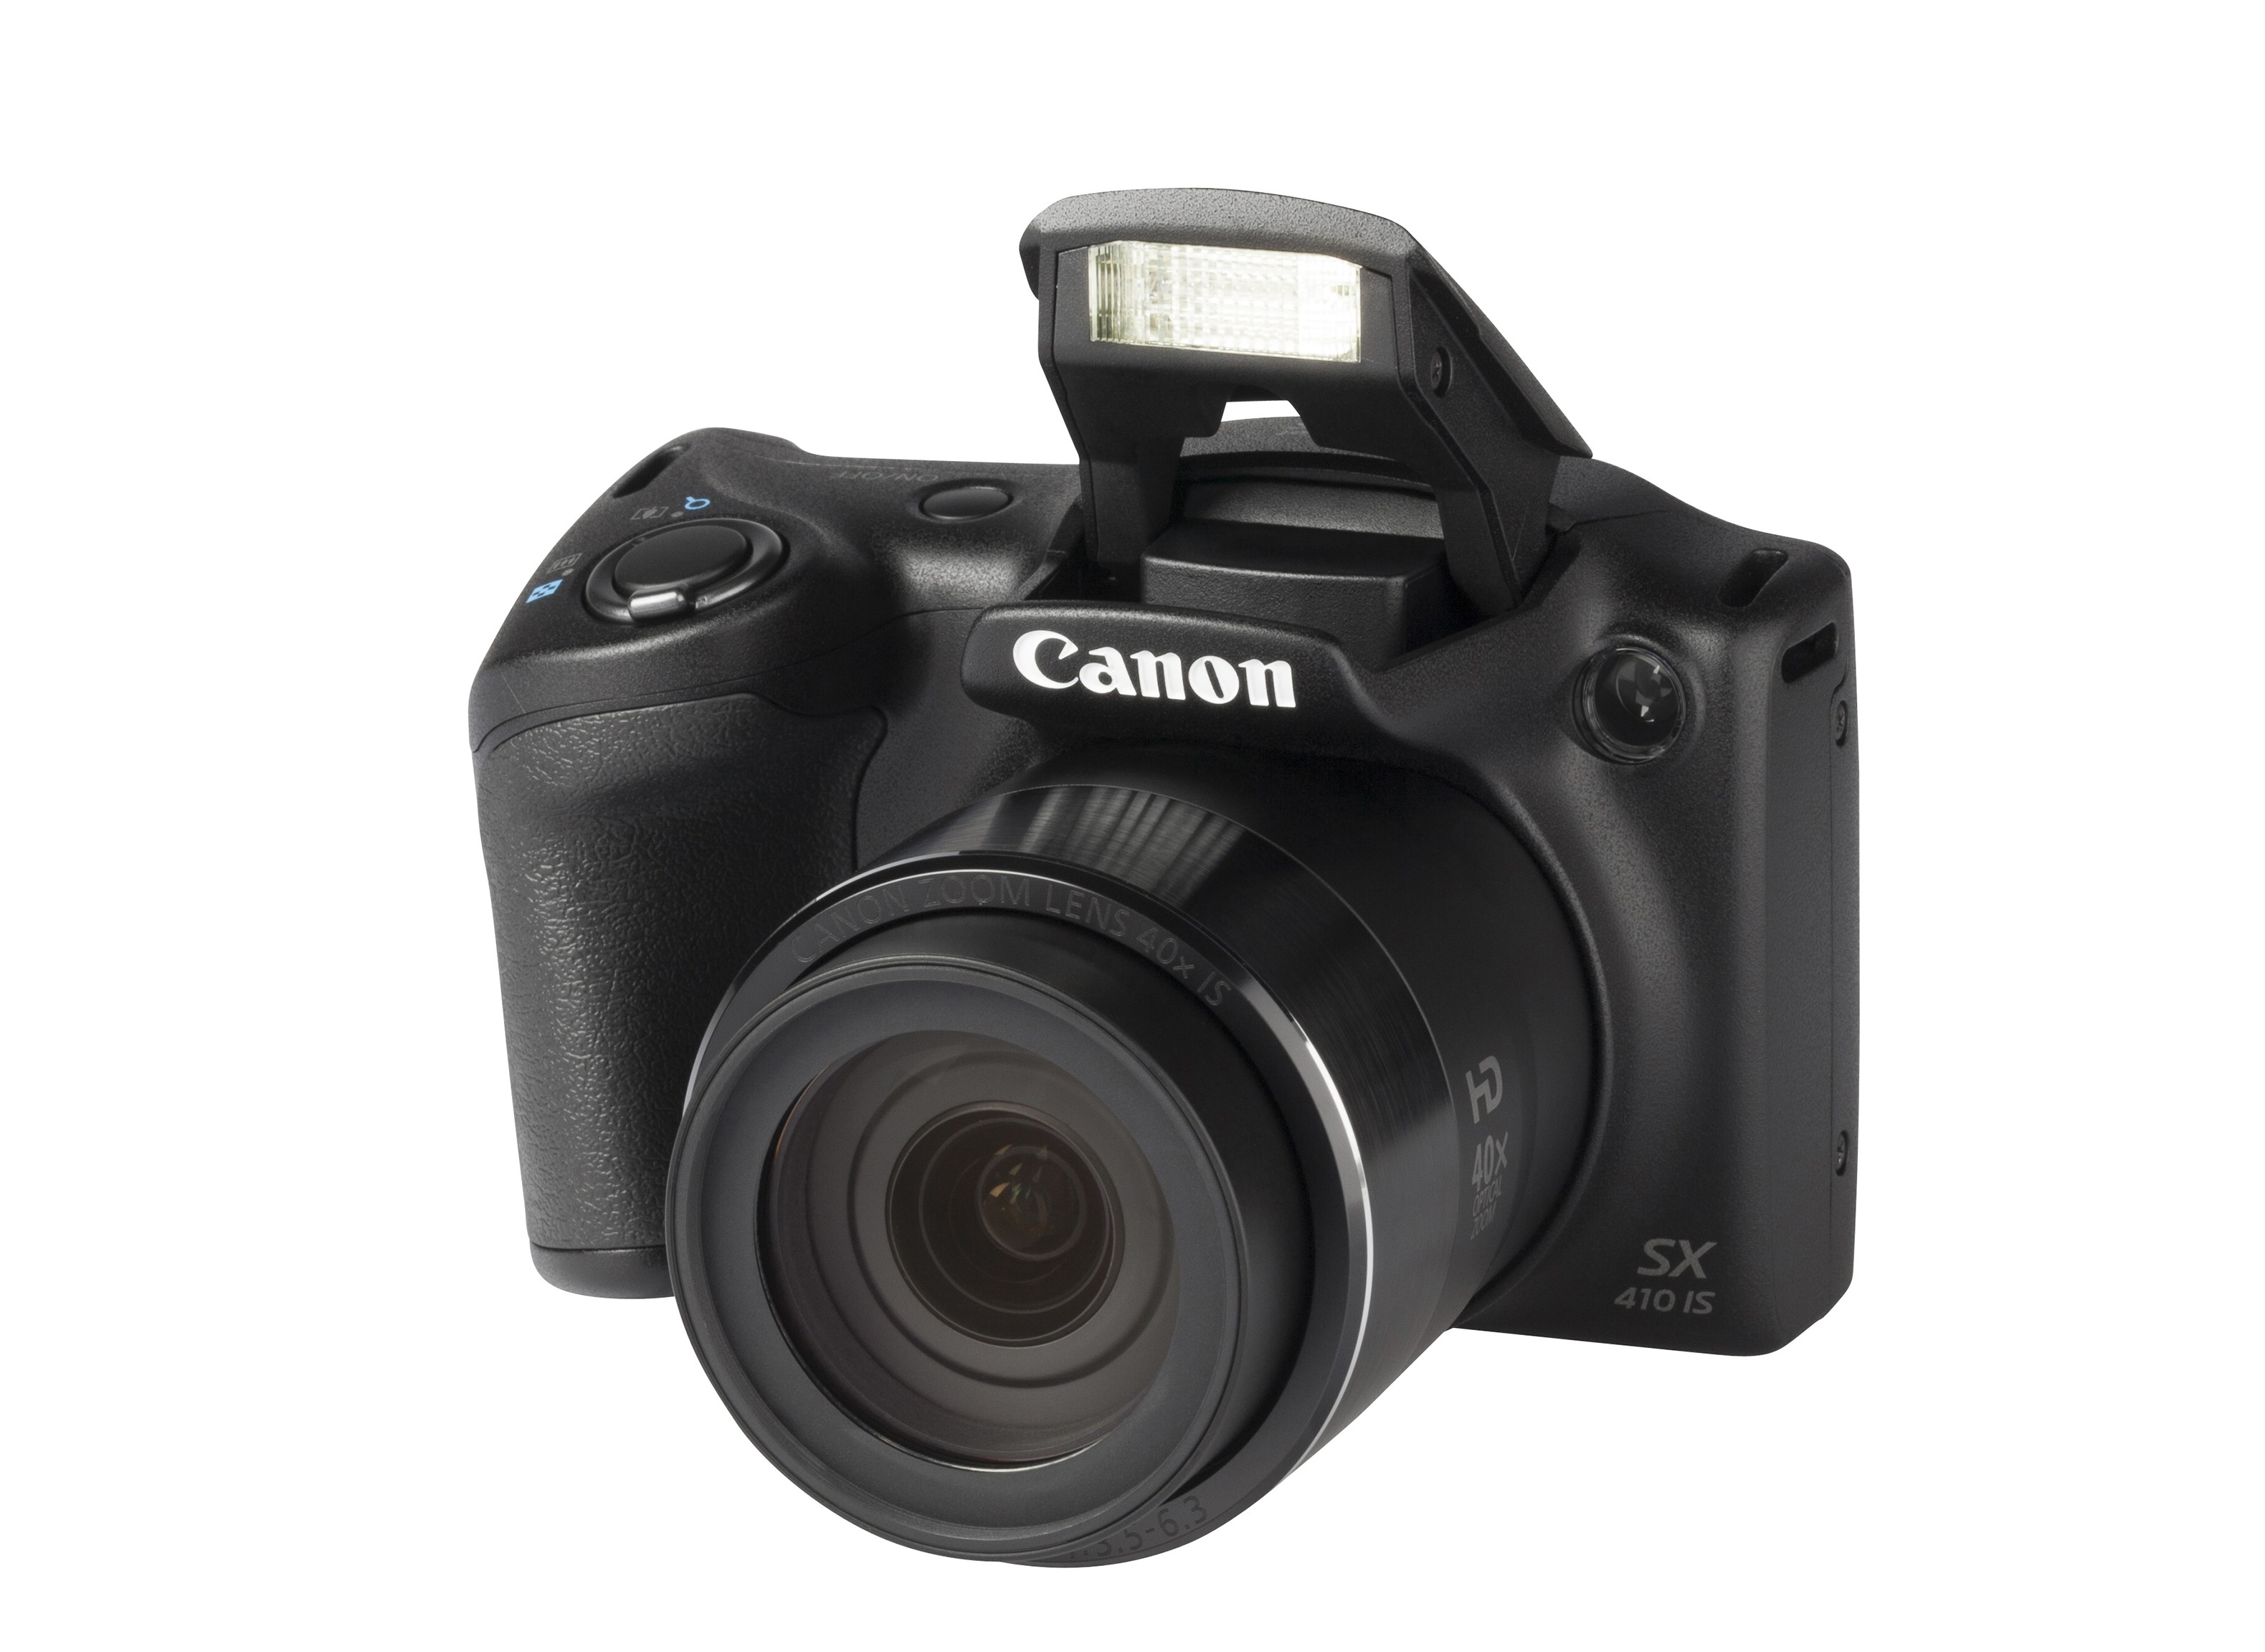 Canon PowerShot SX410 IS Camera Review - Consumer Reports